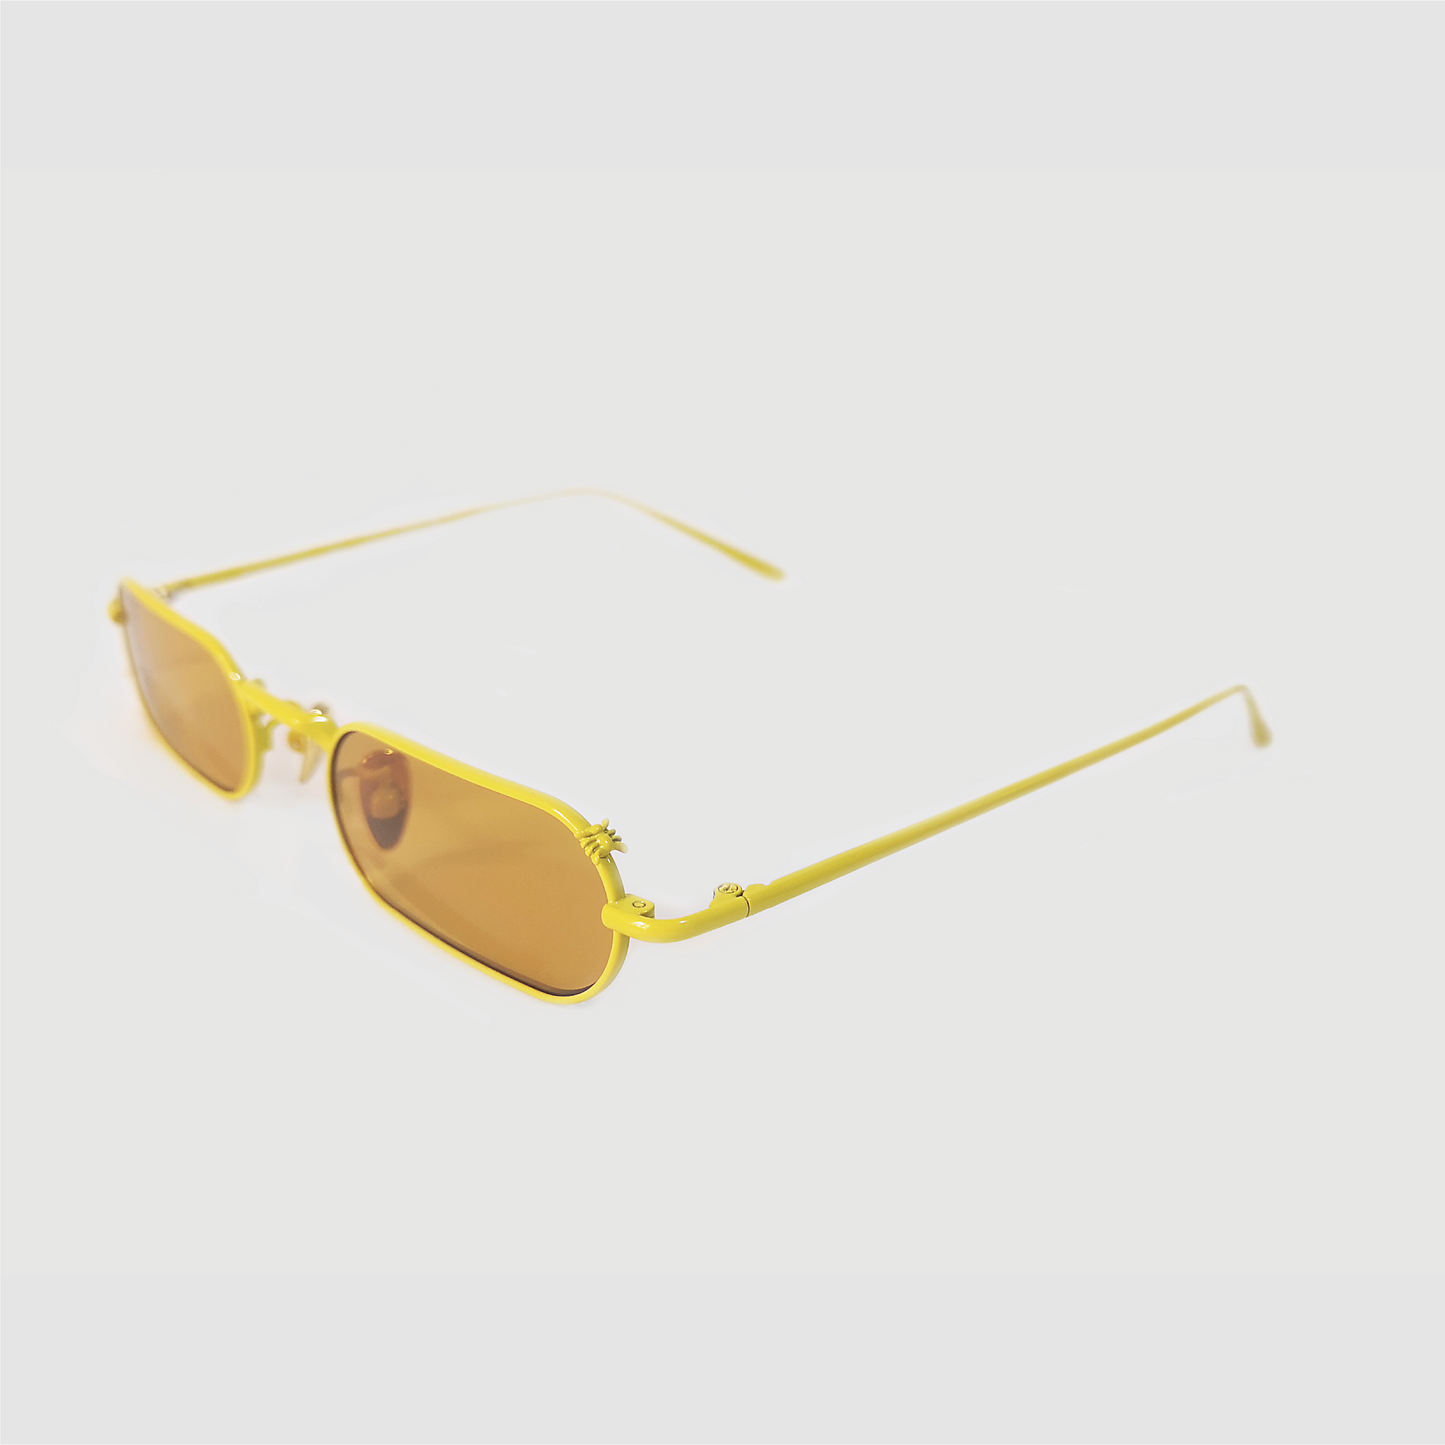 stadium shaped sunglasses with dark yellow lens and yellow stainless steel frame 45 angled